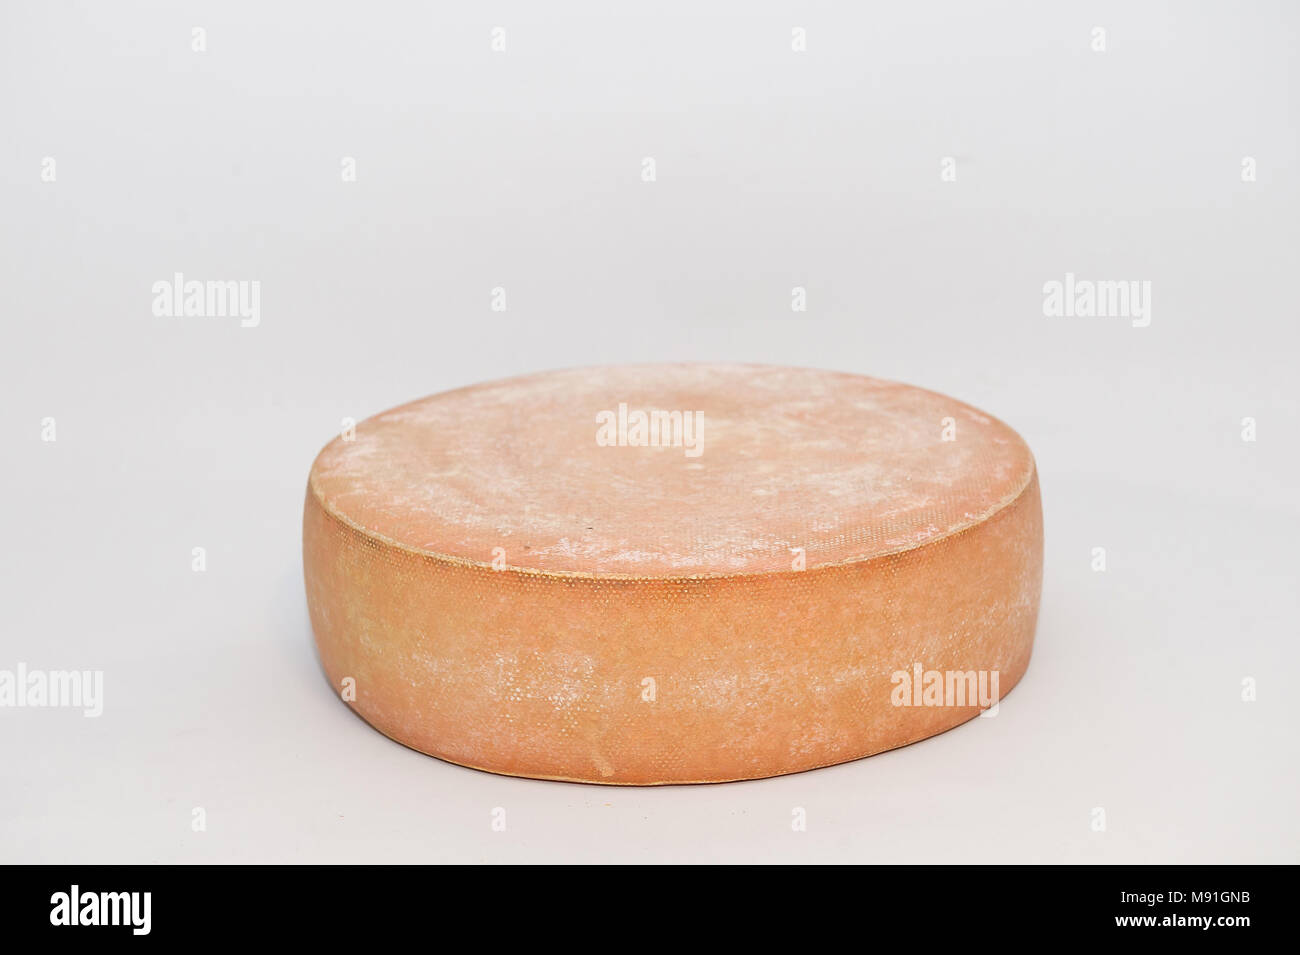 Bergkase names a group of hard cheeses made in the Alps Stock Photo